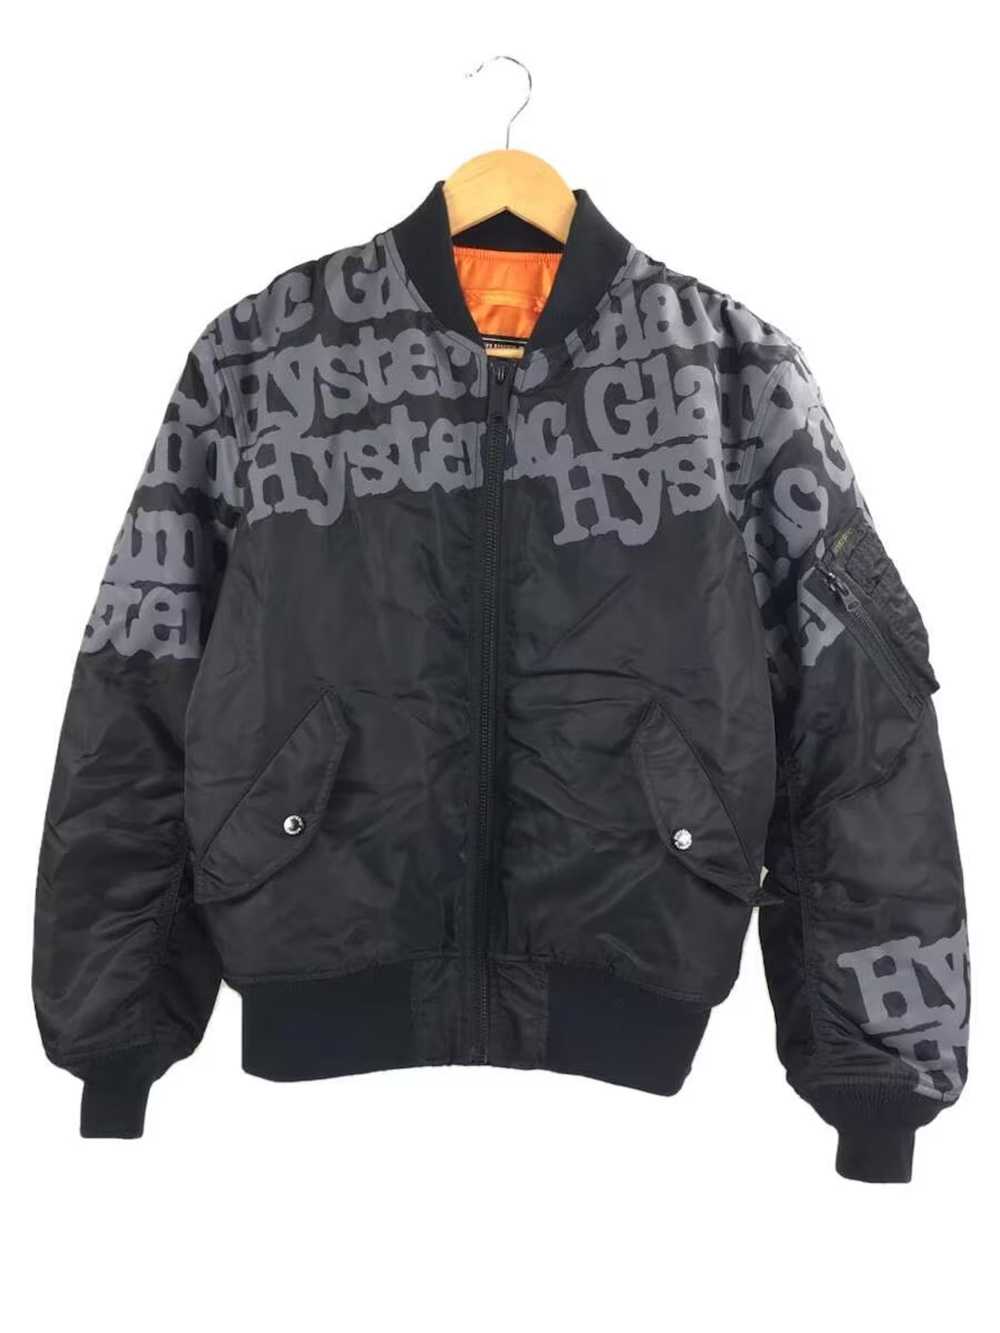 Hysteric Glamour AW21 Script Bomber Jacket - image 1